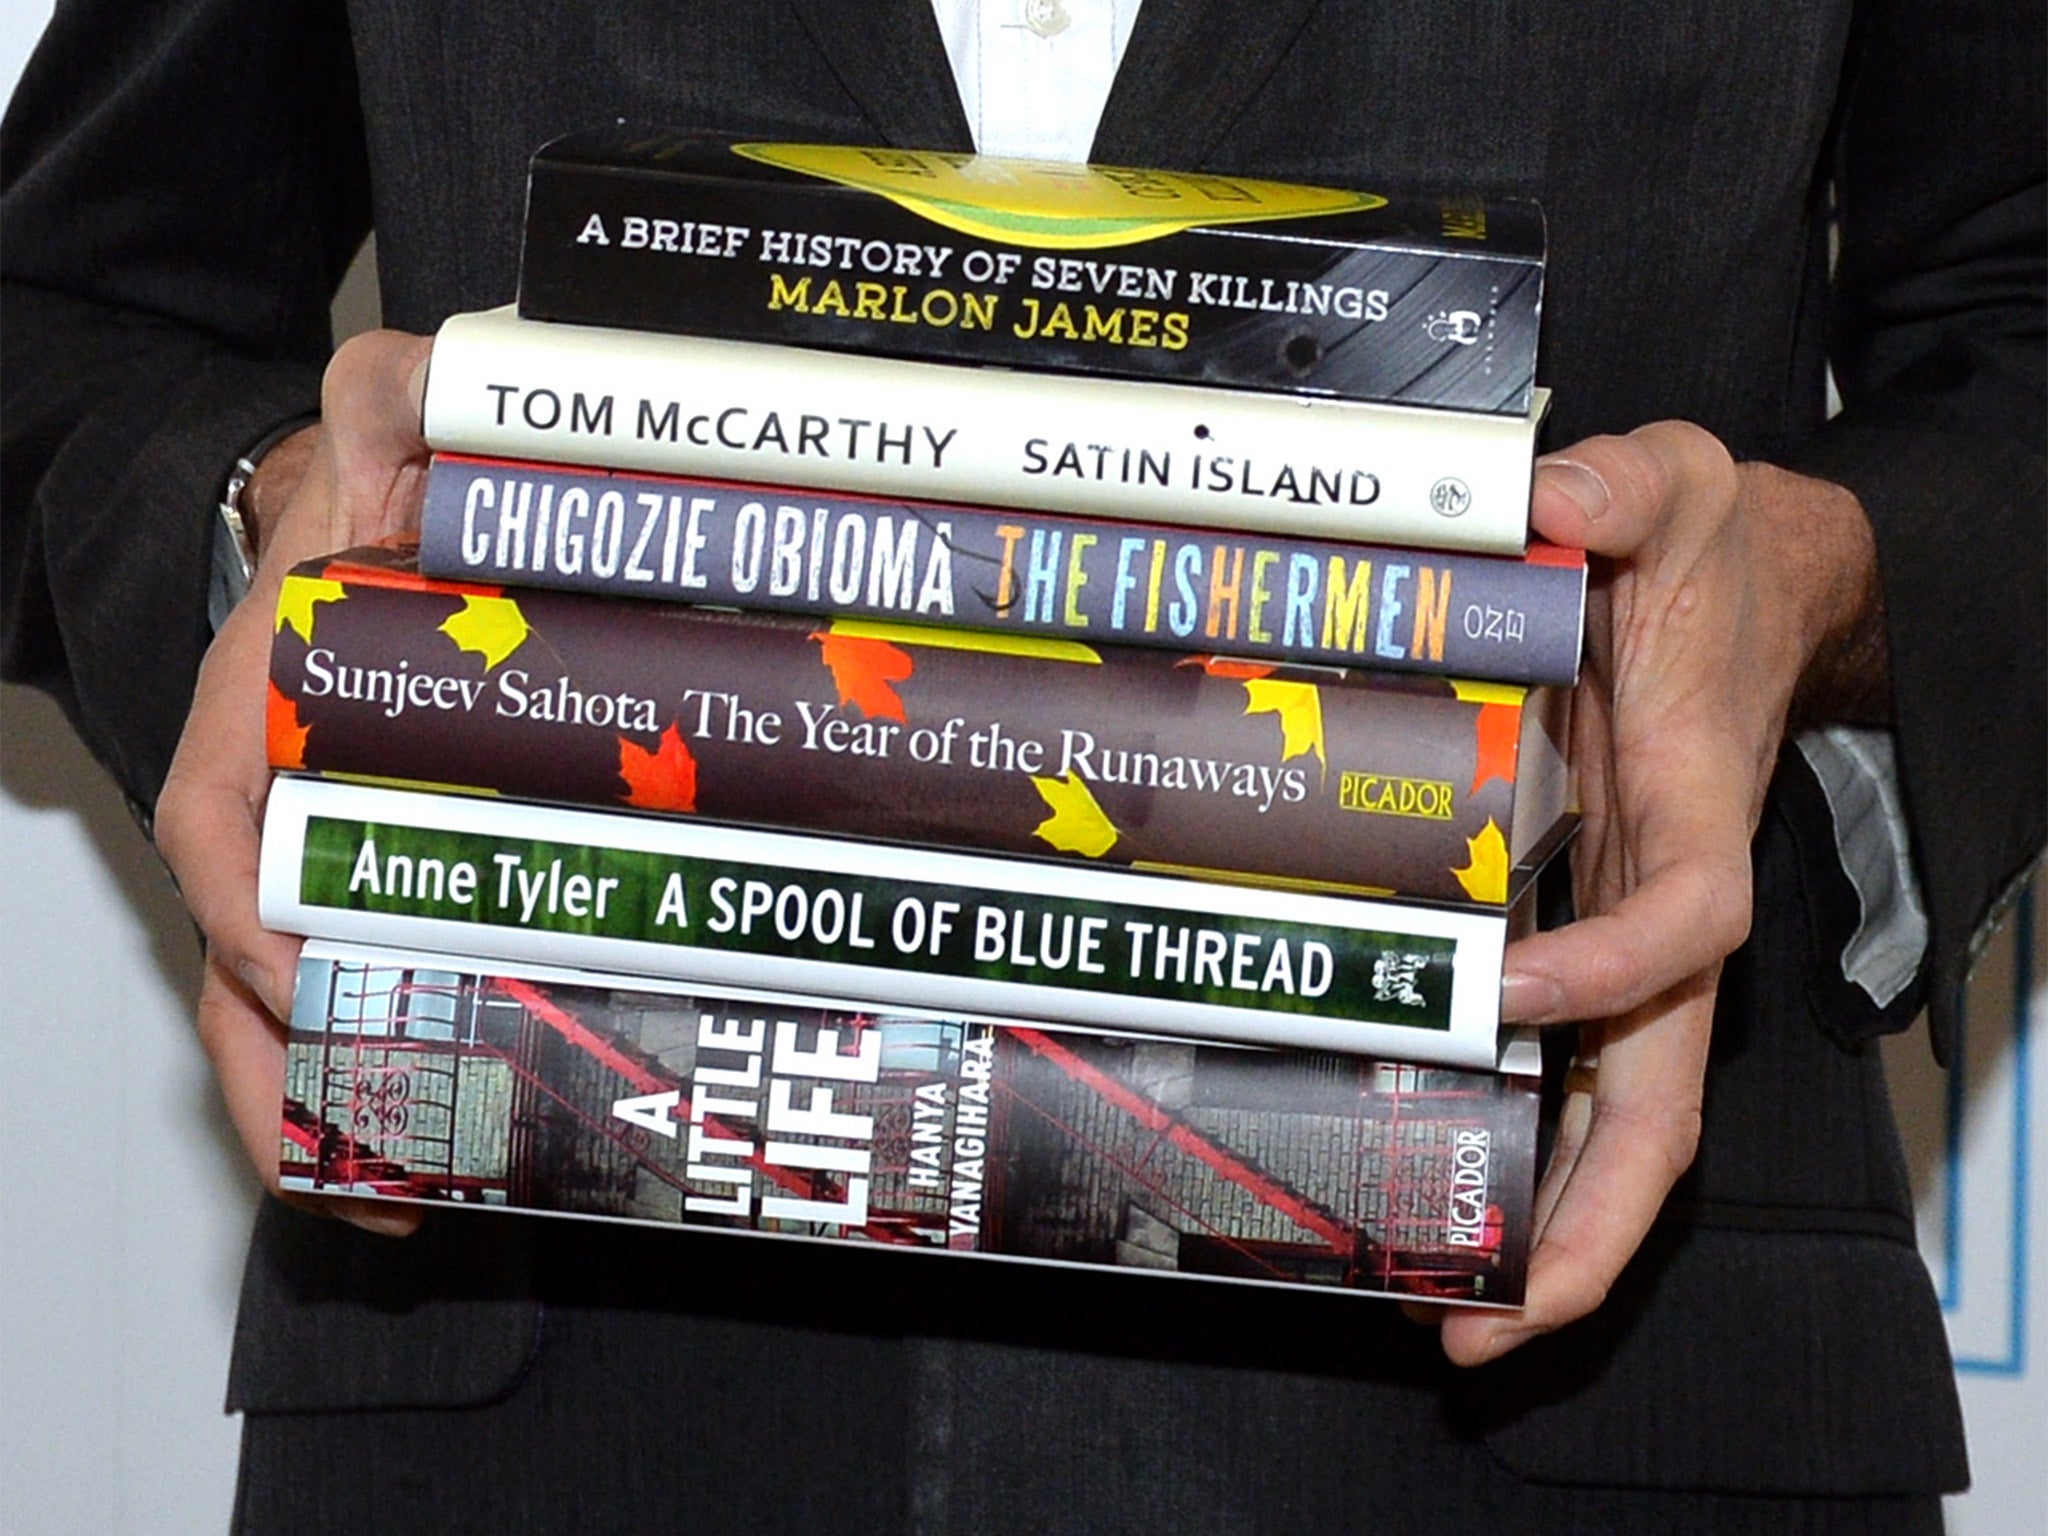 The six books that made the Man Booker Prize shortlist